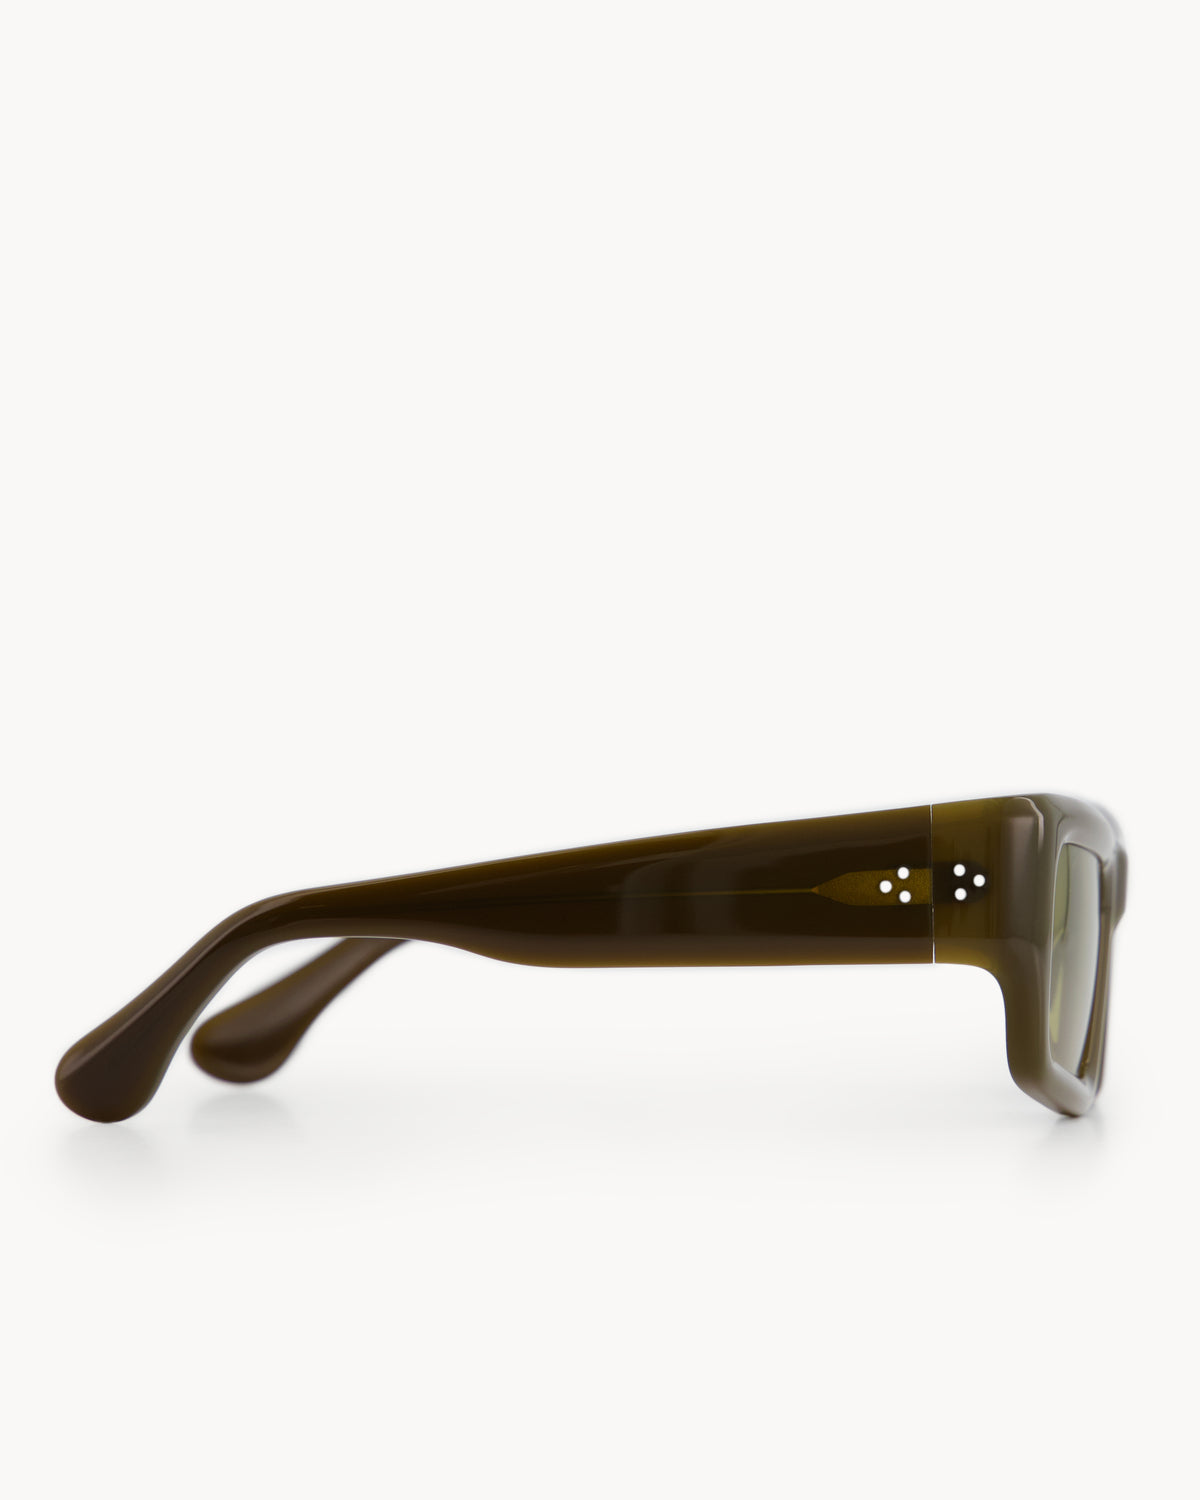 Port Tanger Sabea Sunglasses in Zaytun Acetate and Warm Olive Lenses 4